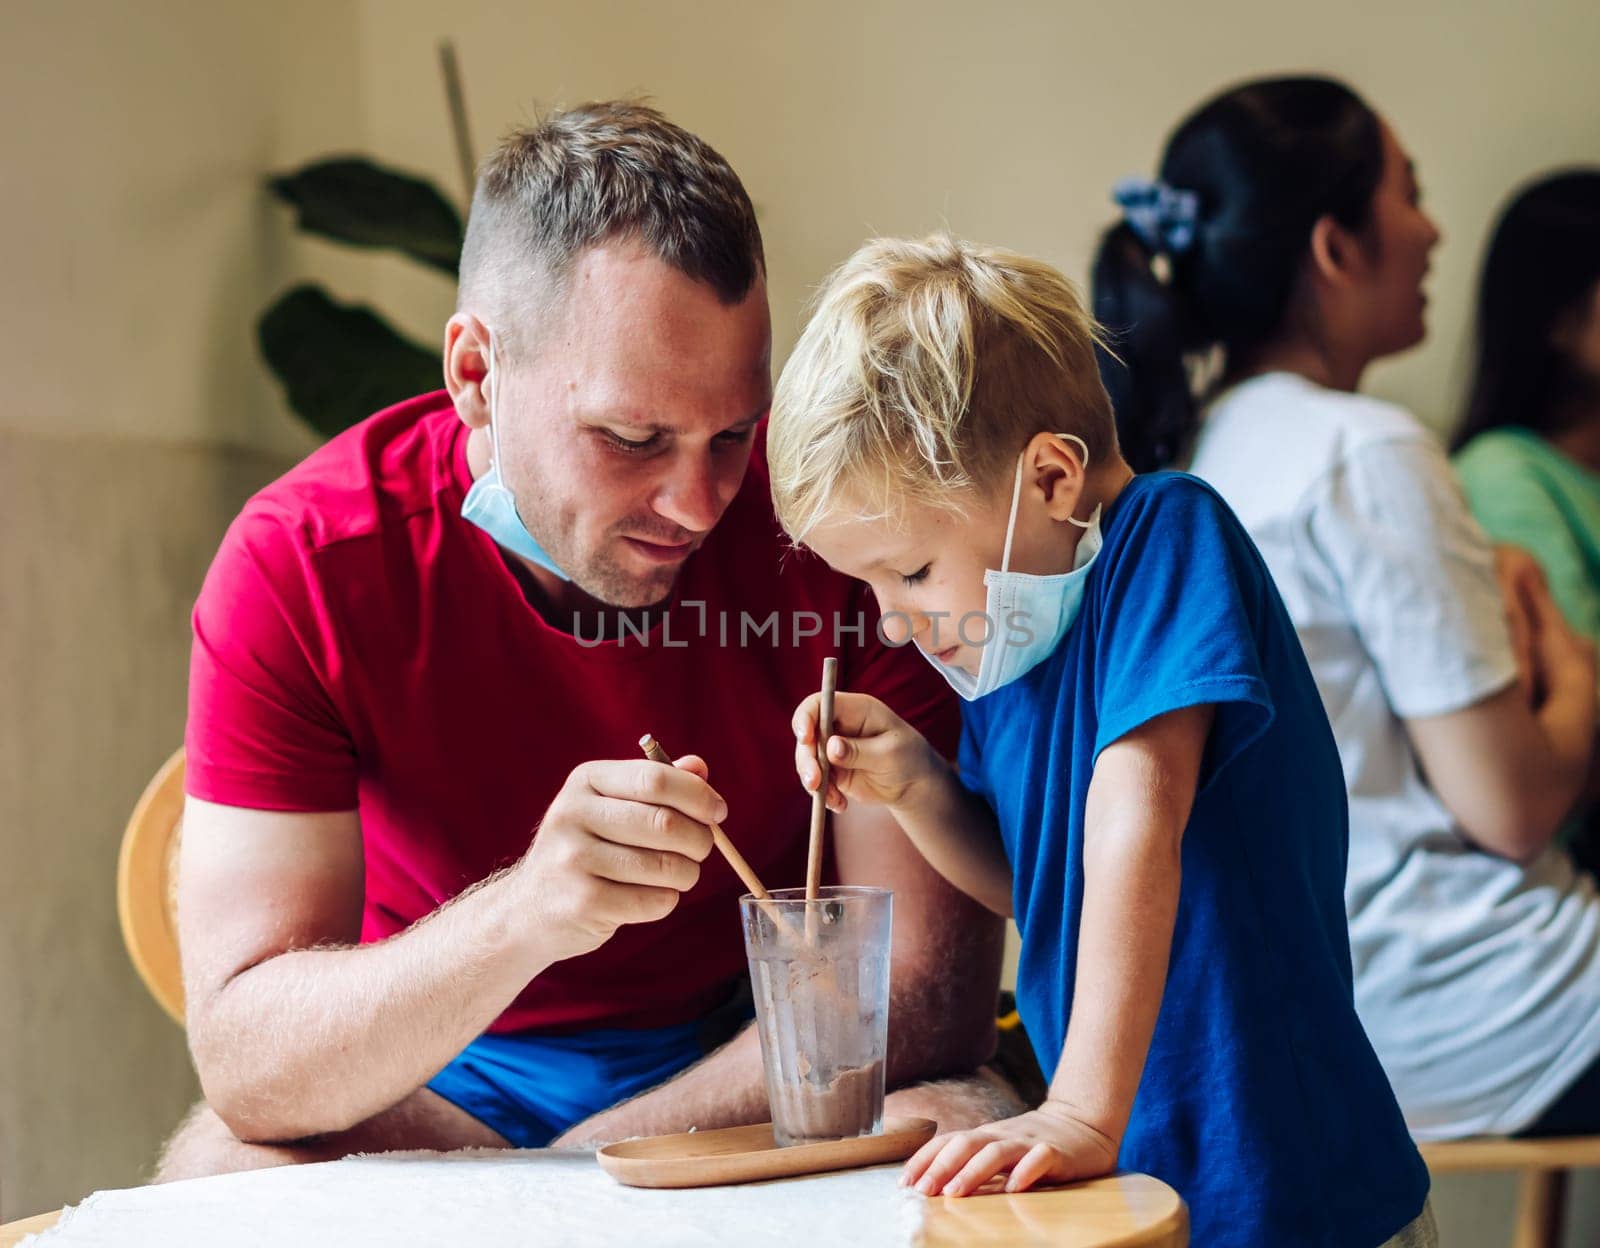 Father and son eat chocolate dessert with spoons in Cafe. Spending time together. Sweet tooth. Happy childhood by nandrey85